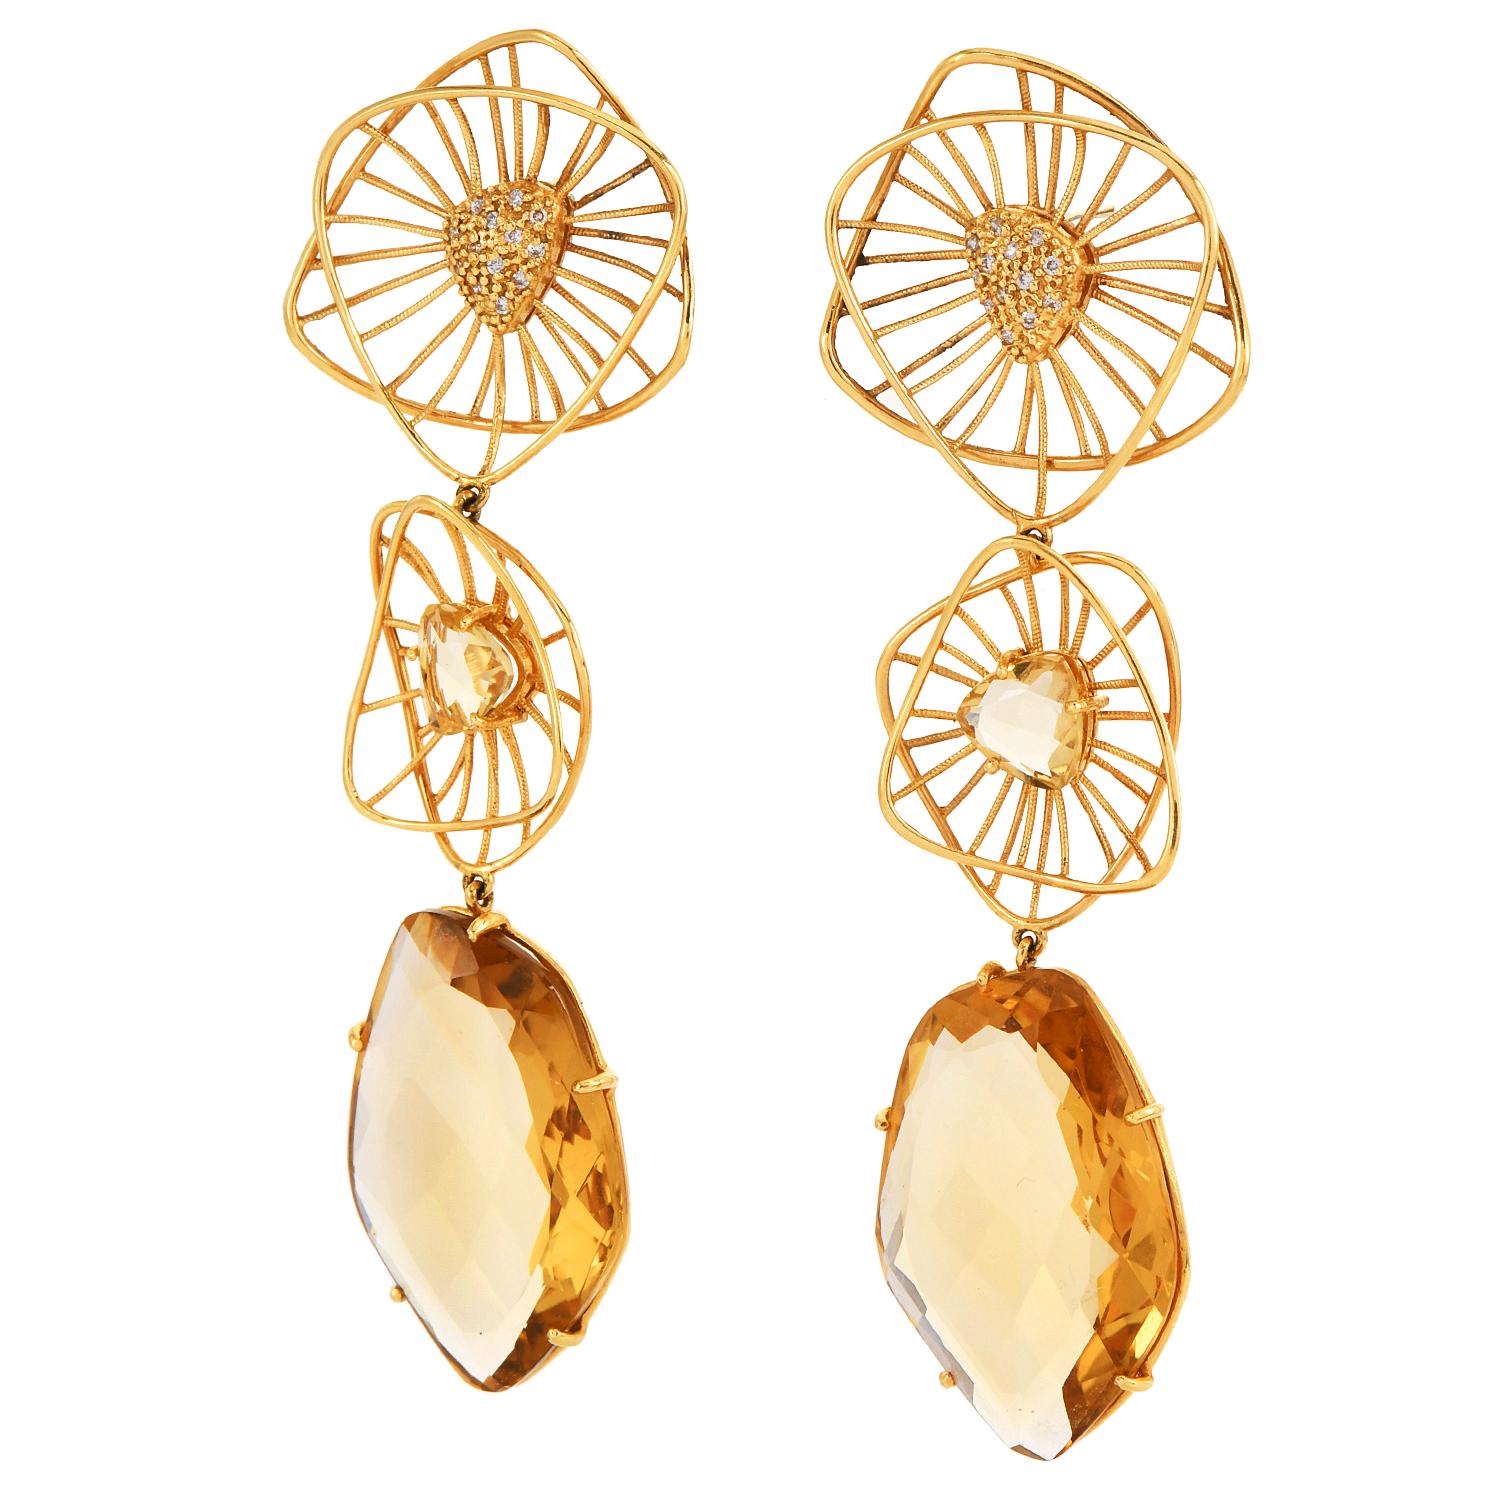 Estate Diamond Citrine 18K Gold Three Drop Dangle Earrings

Very Well made evening wear Art and Crafts Dressy Triangular 3 link drop Earrings crafted in 18K Yellow gold with Natural Round Diamonds and Freeform Rose cut Genuine Citrine gemstone